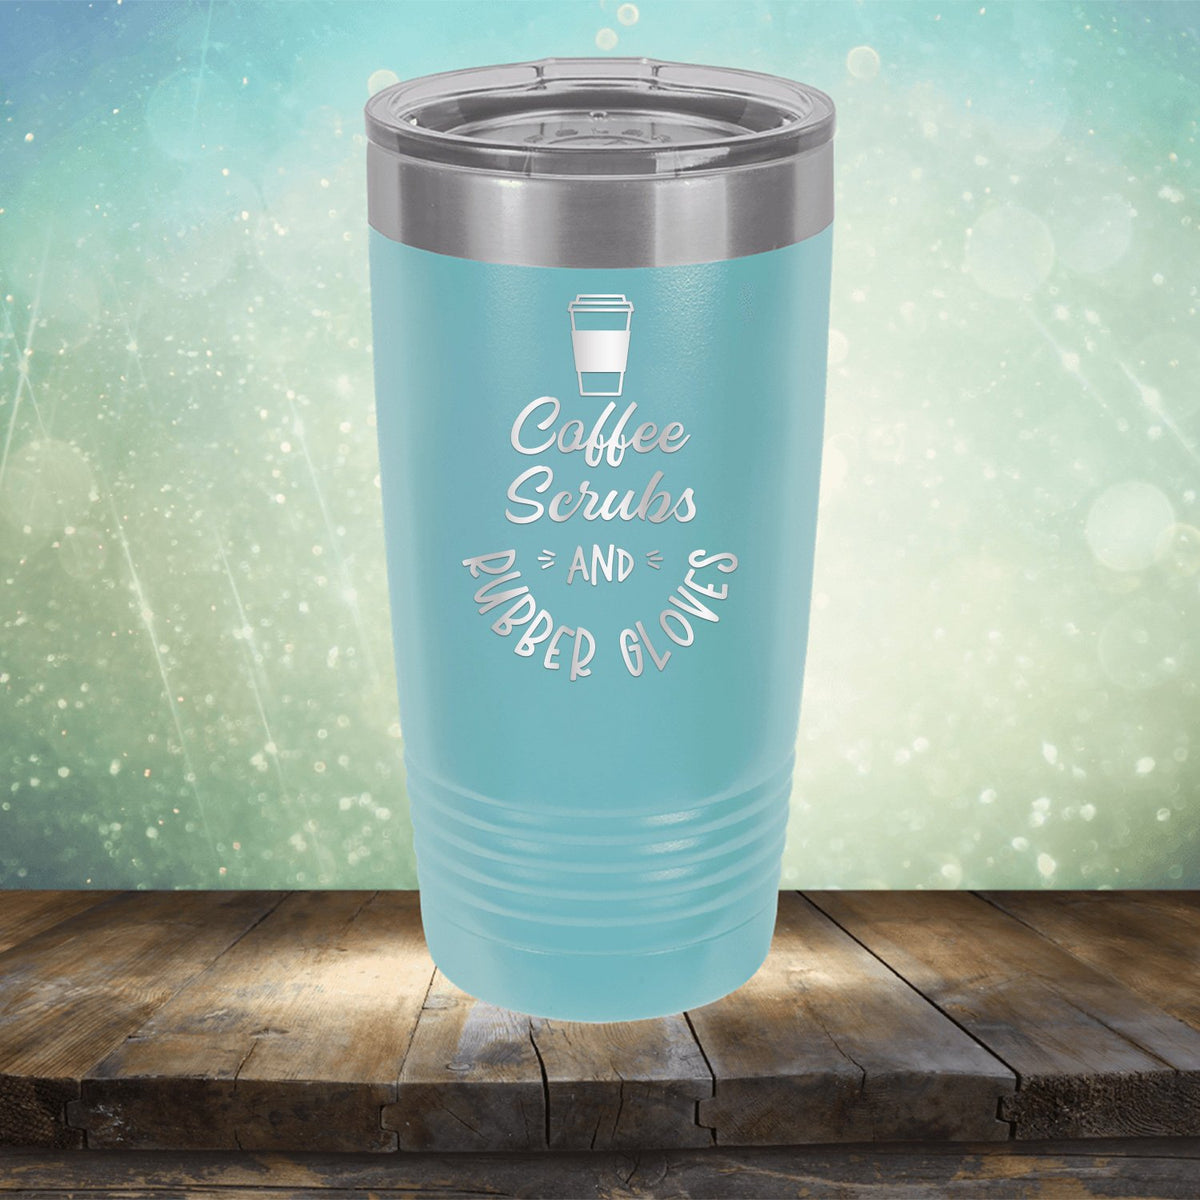 It&#39;s Not A Dad Bod It&#39;s A Father Figure - Laser Etched Tumbler Mug